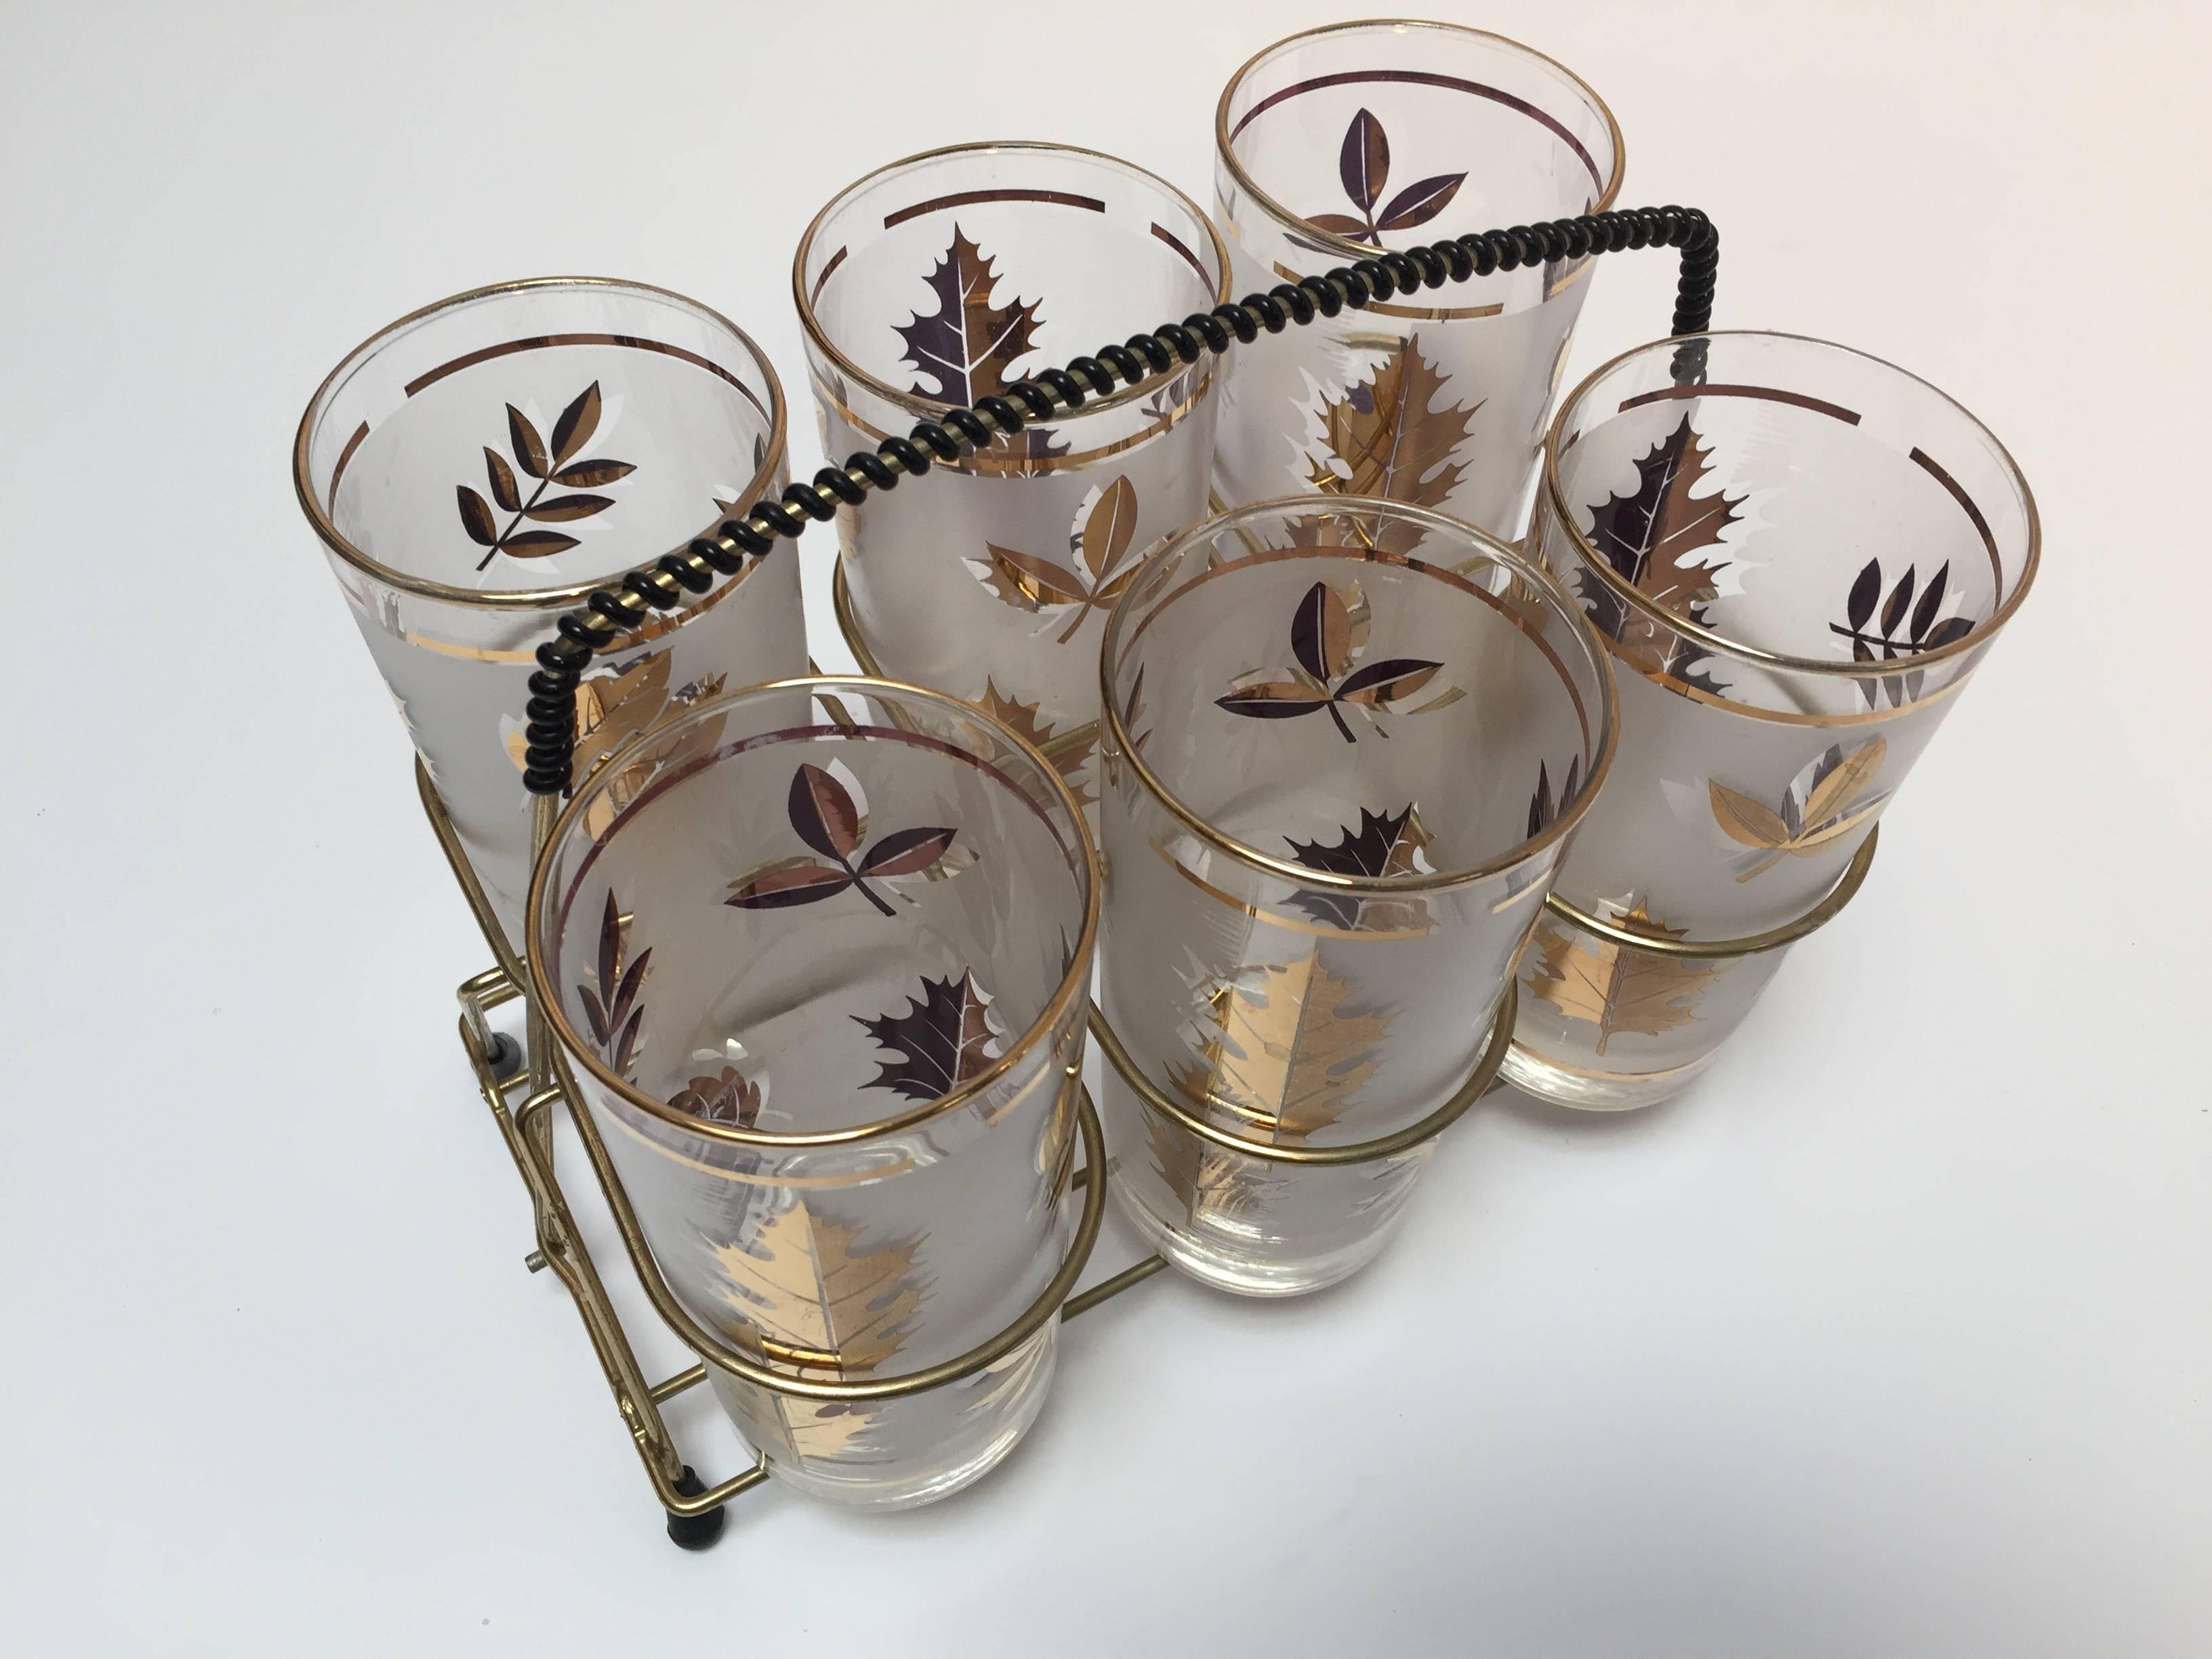 Elegant vintage Libbey barware frosted glasses with leaves pattern in a gold finish.
Set includes six highball glasses in a polished brass cart with a handle. Mid-Century Modern vintage glasses.
Hollywood Regency style.
The pattern on frosted